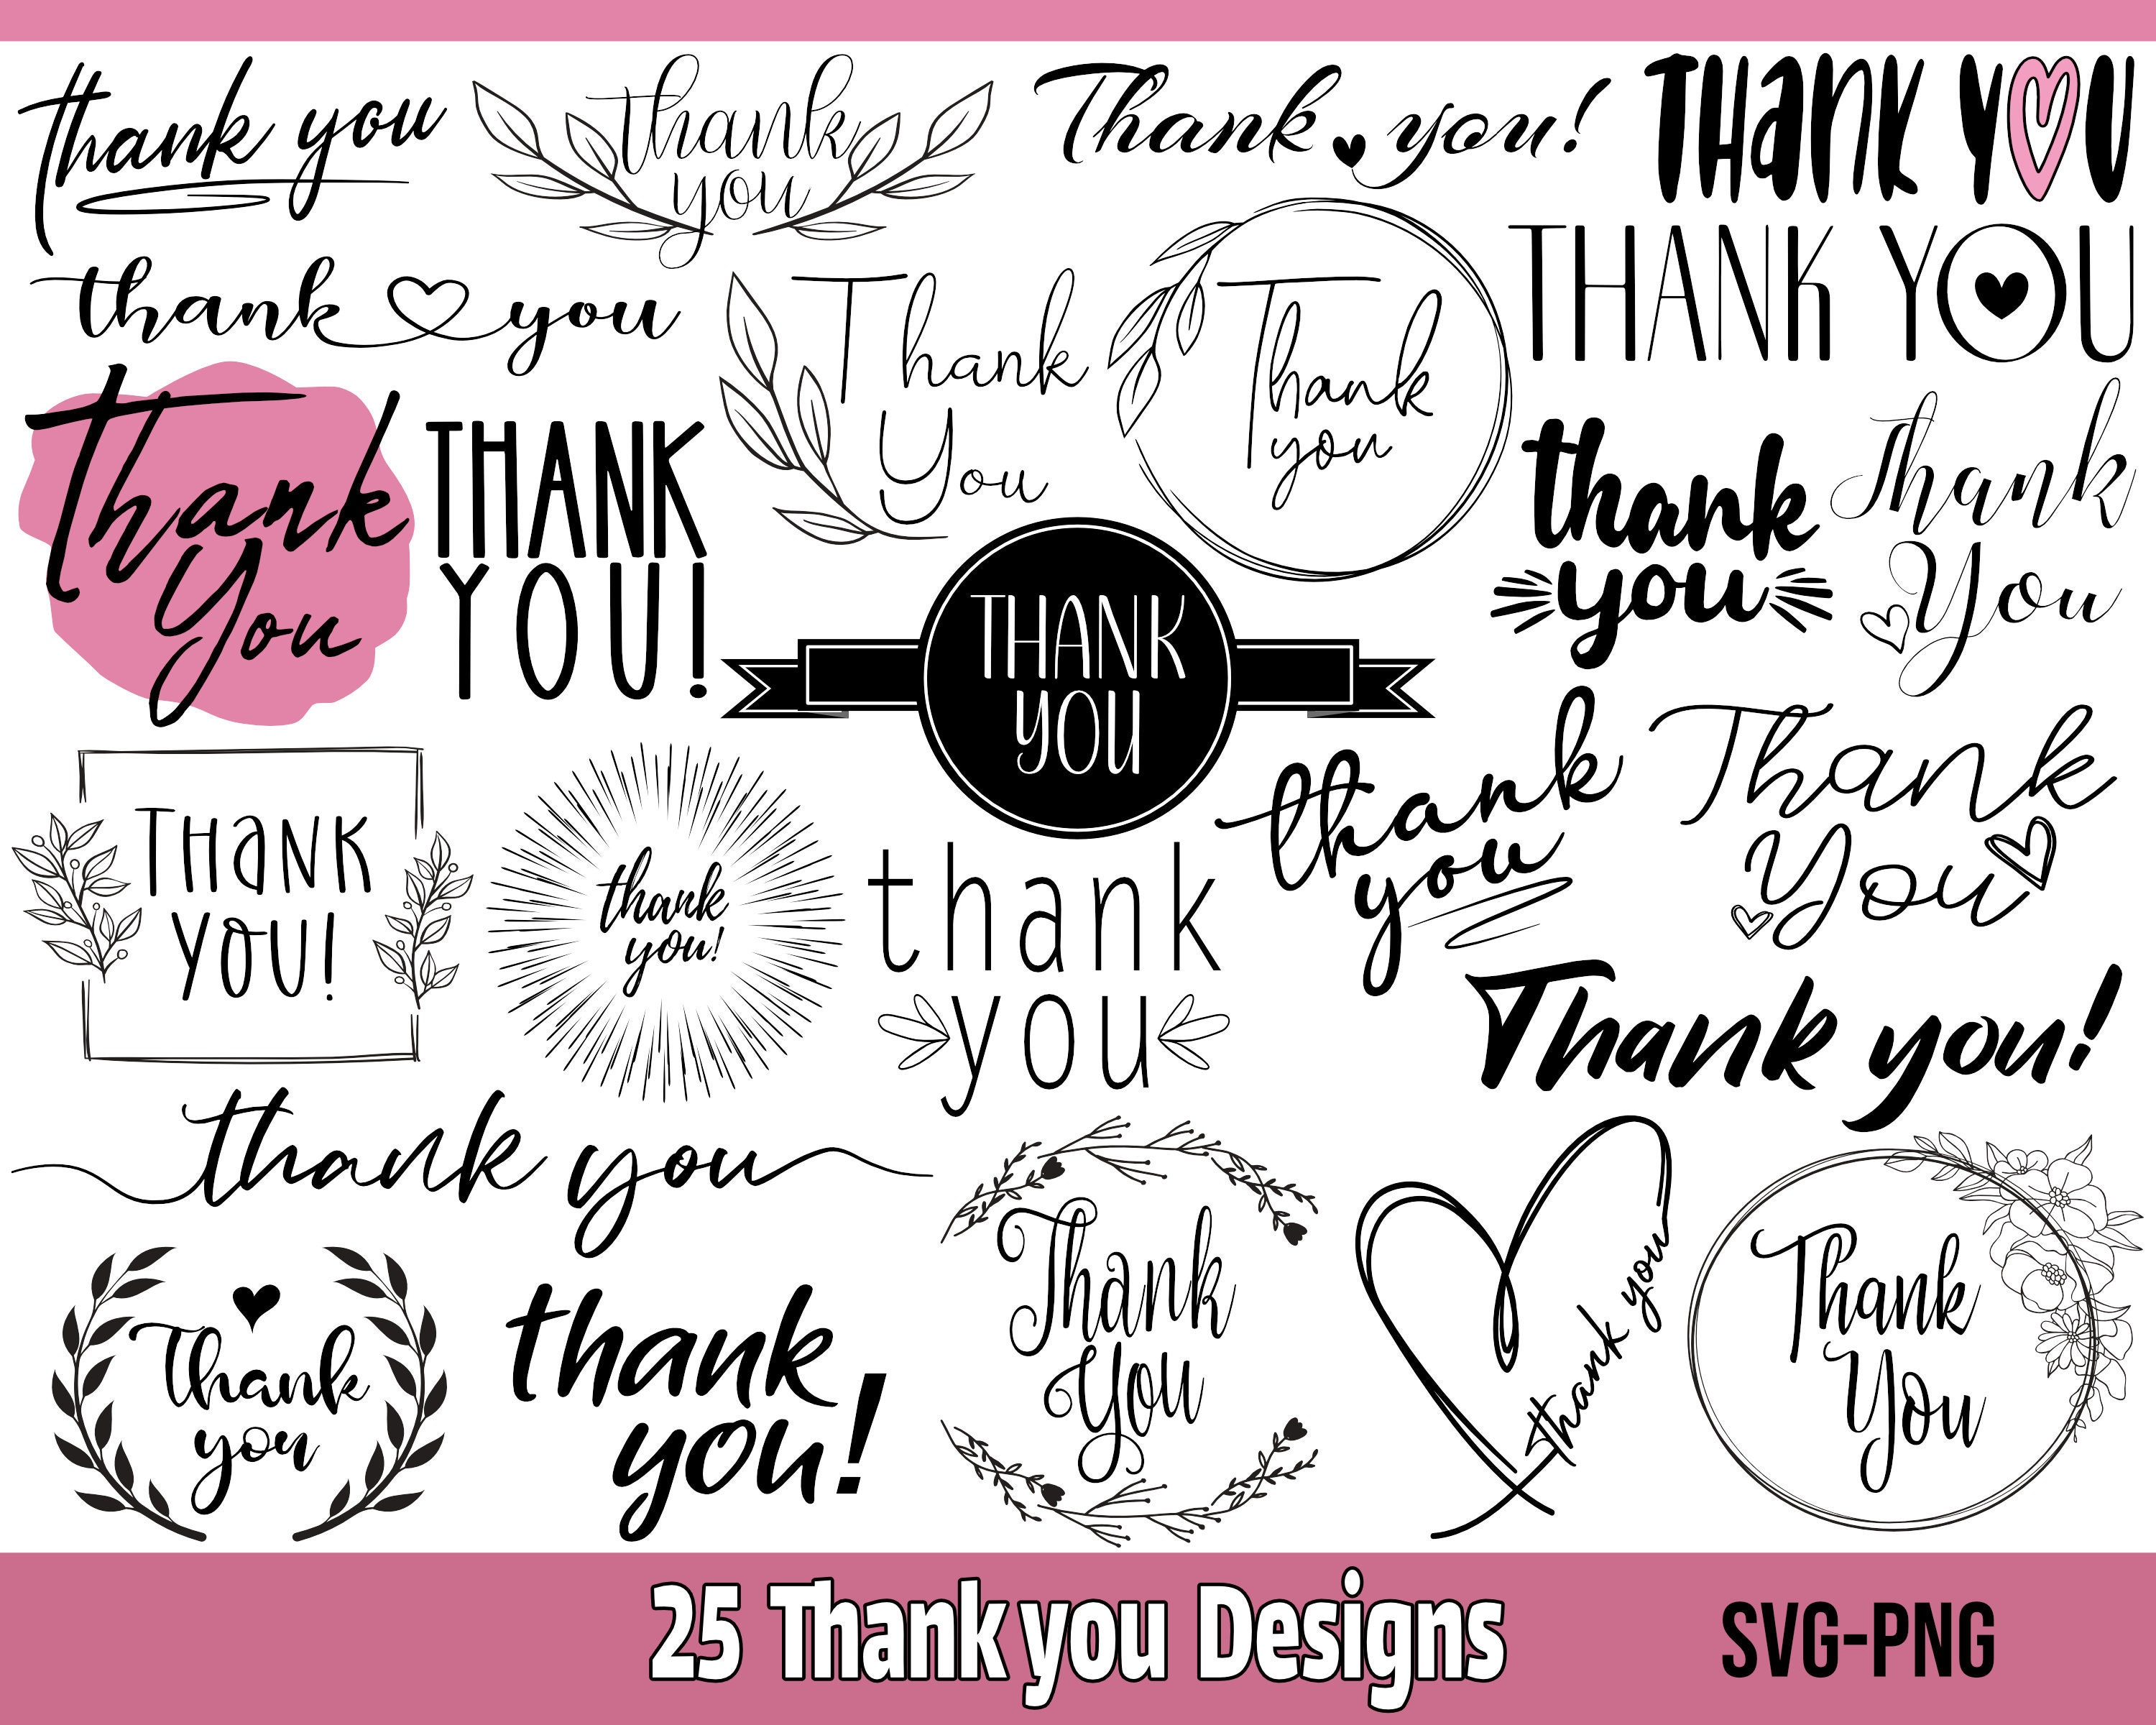 Hand Made With Love Svg Cut File / Just for you Cricut Cut File, Thank you  Svg, Png, Eps, Dxf, Pdf, Round Circle,Handdrawn Heart Fathers Day